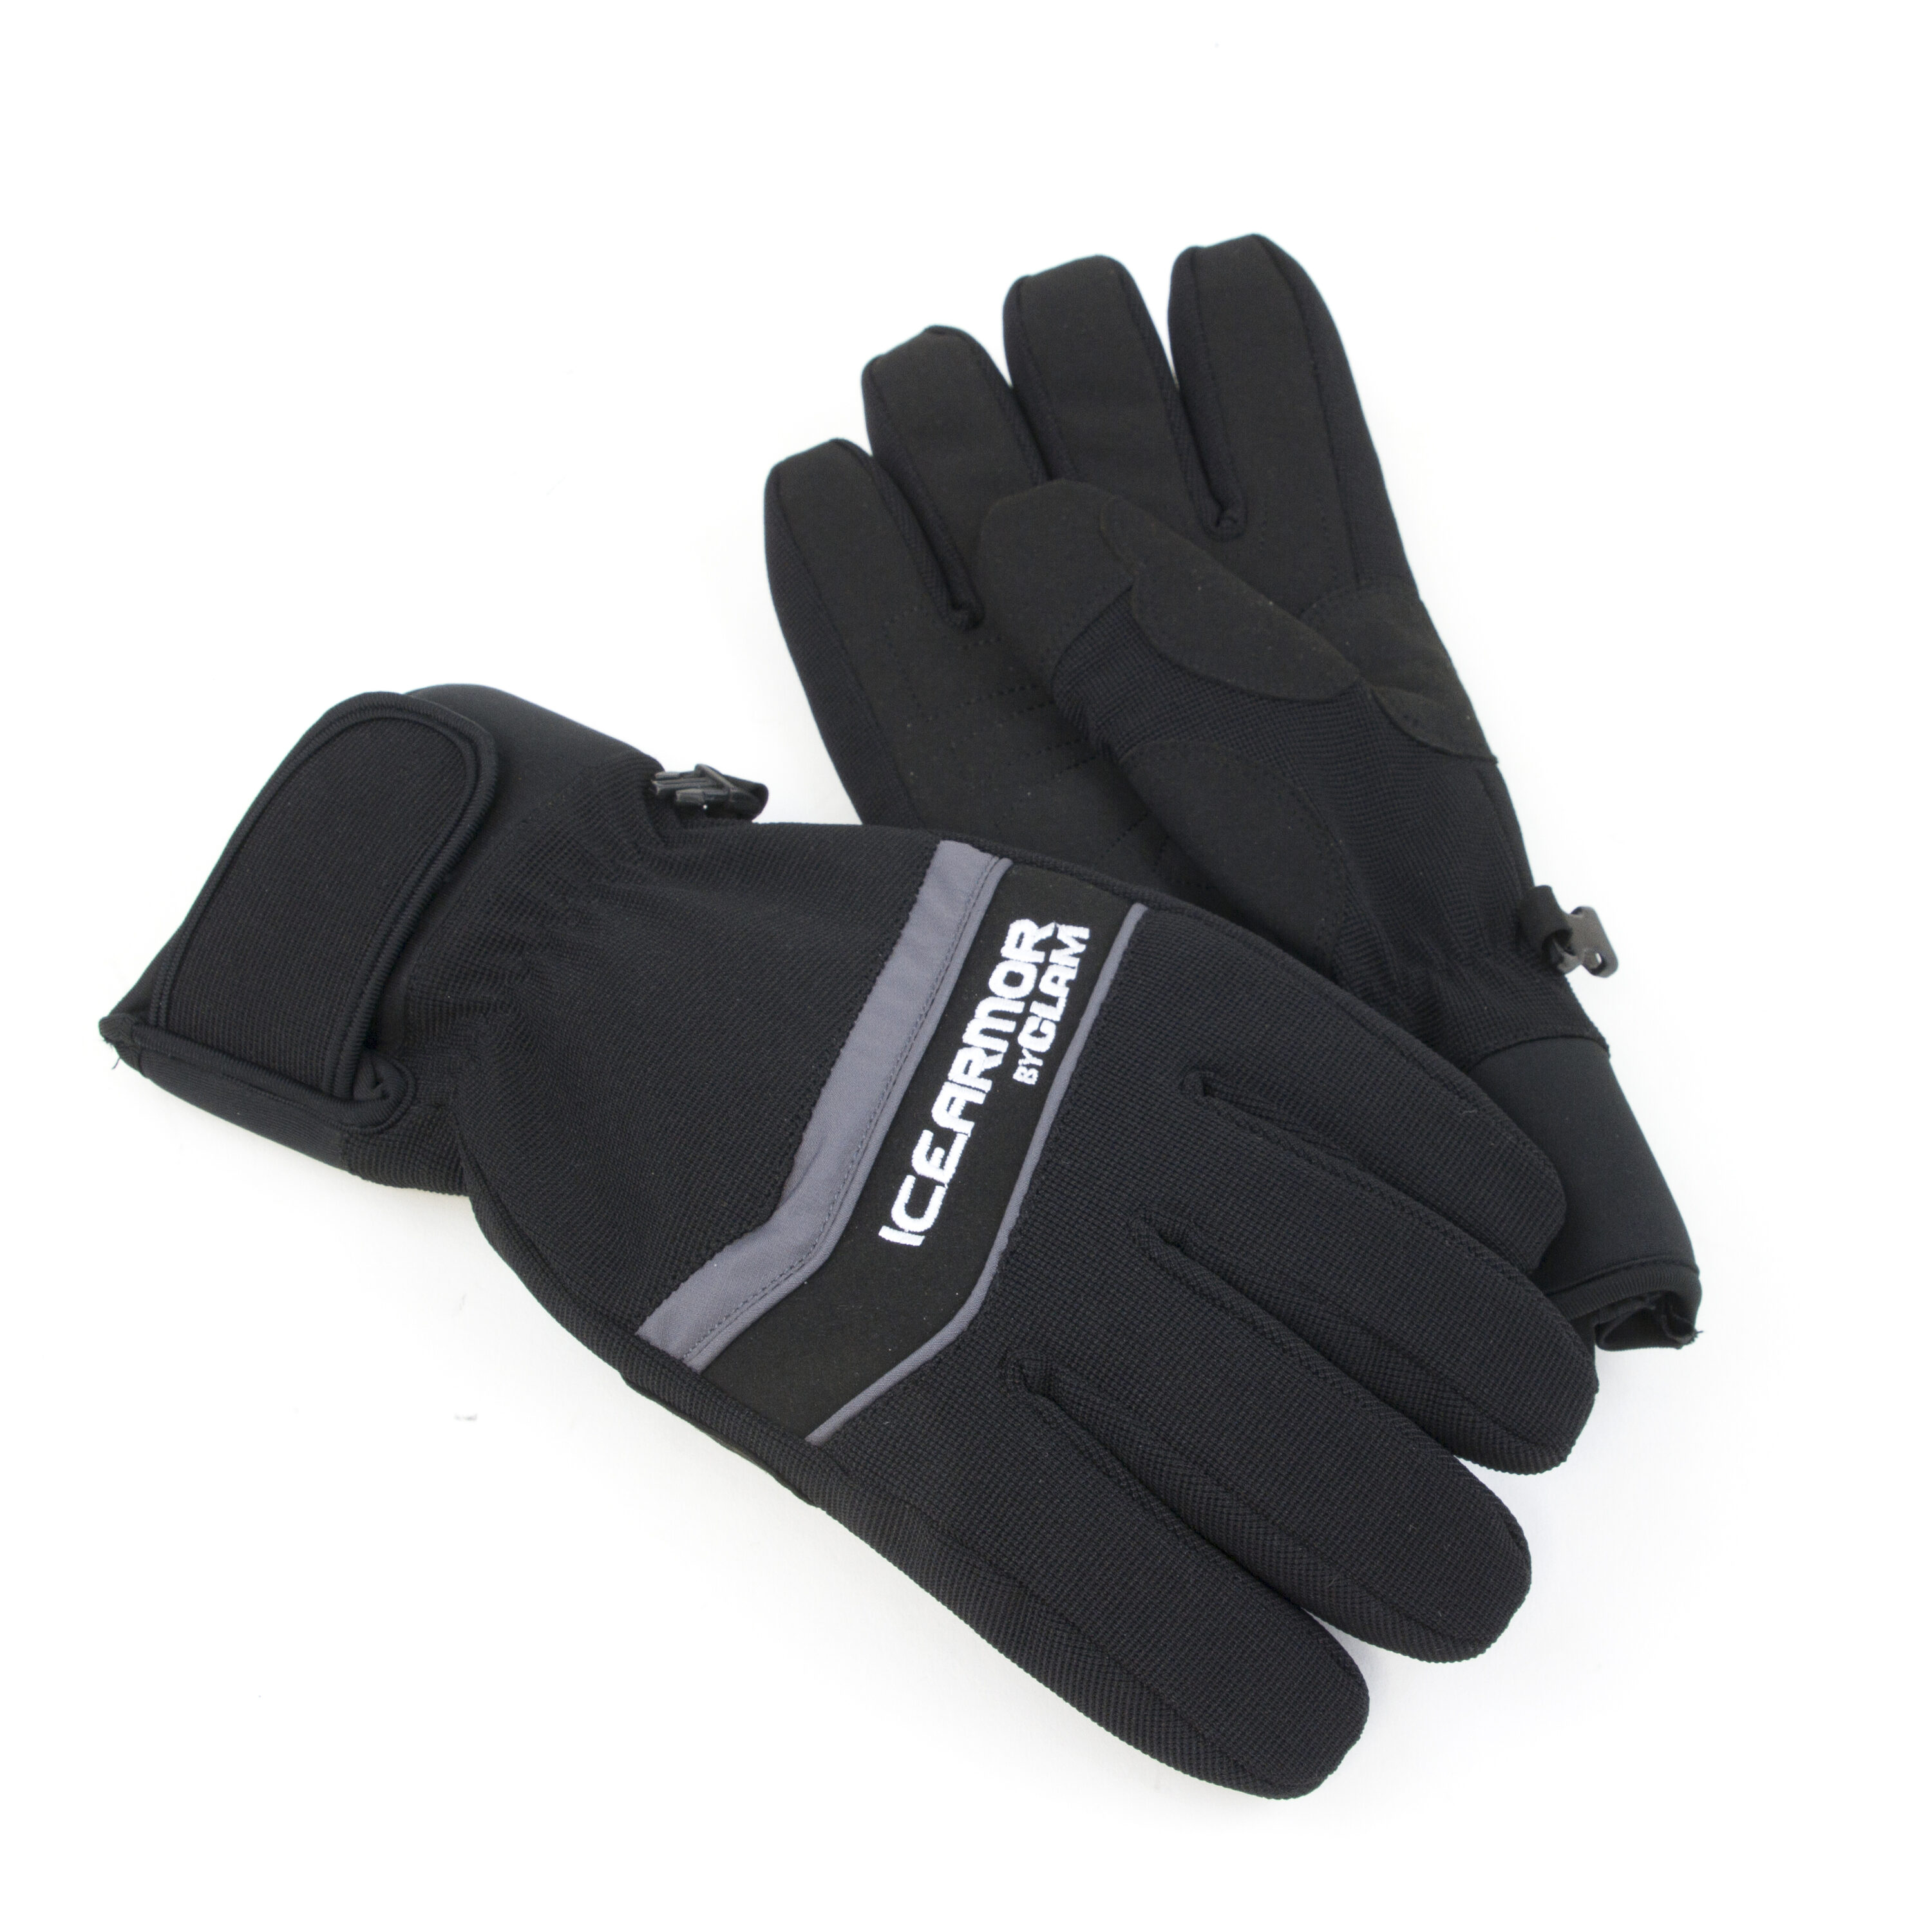 Clam Outdoors Extreme Men's Ice Fishing Gloves - Waterproof